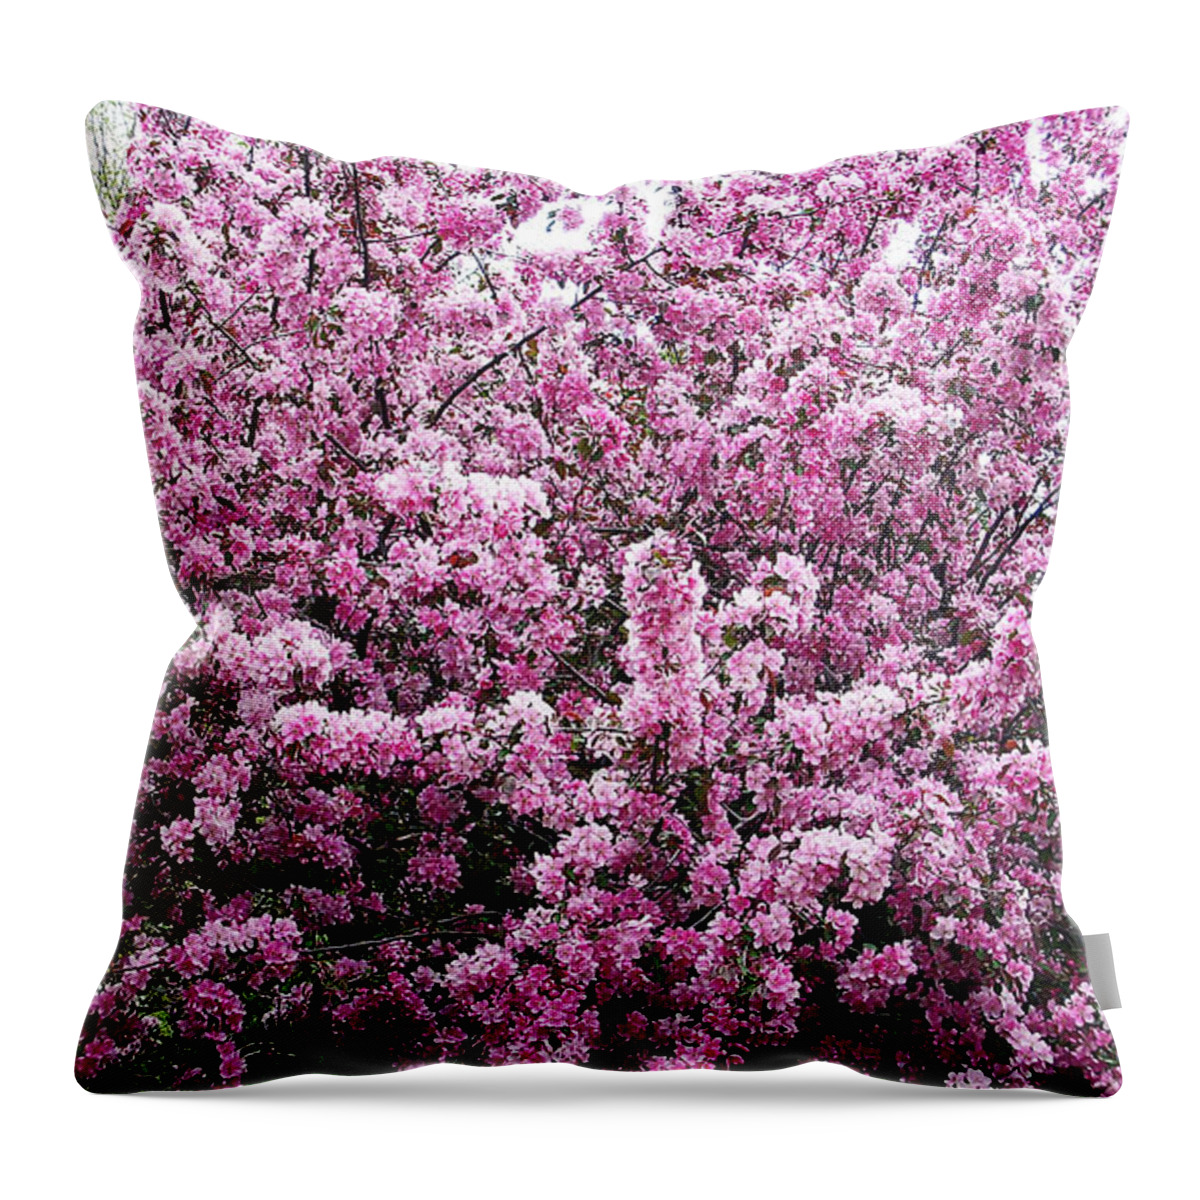 Crab Apple Tree Throw Pillow featuring the photograph Crab Apple Tree by Aimee L Maher ALM GALLERY